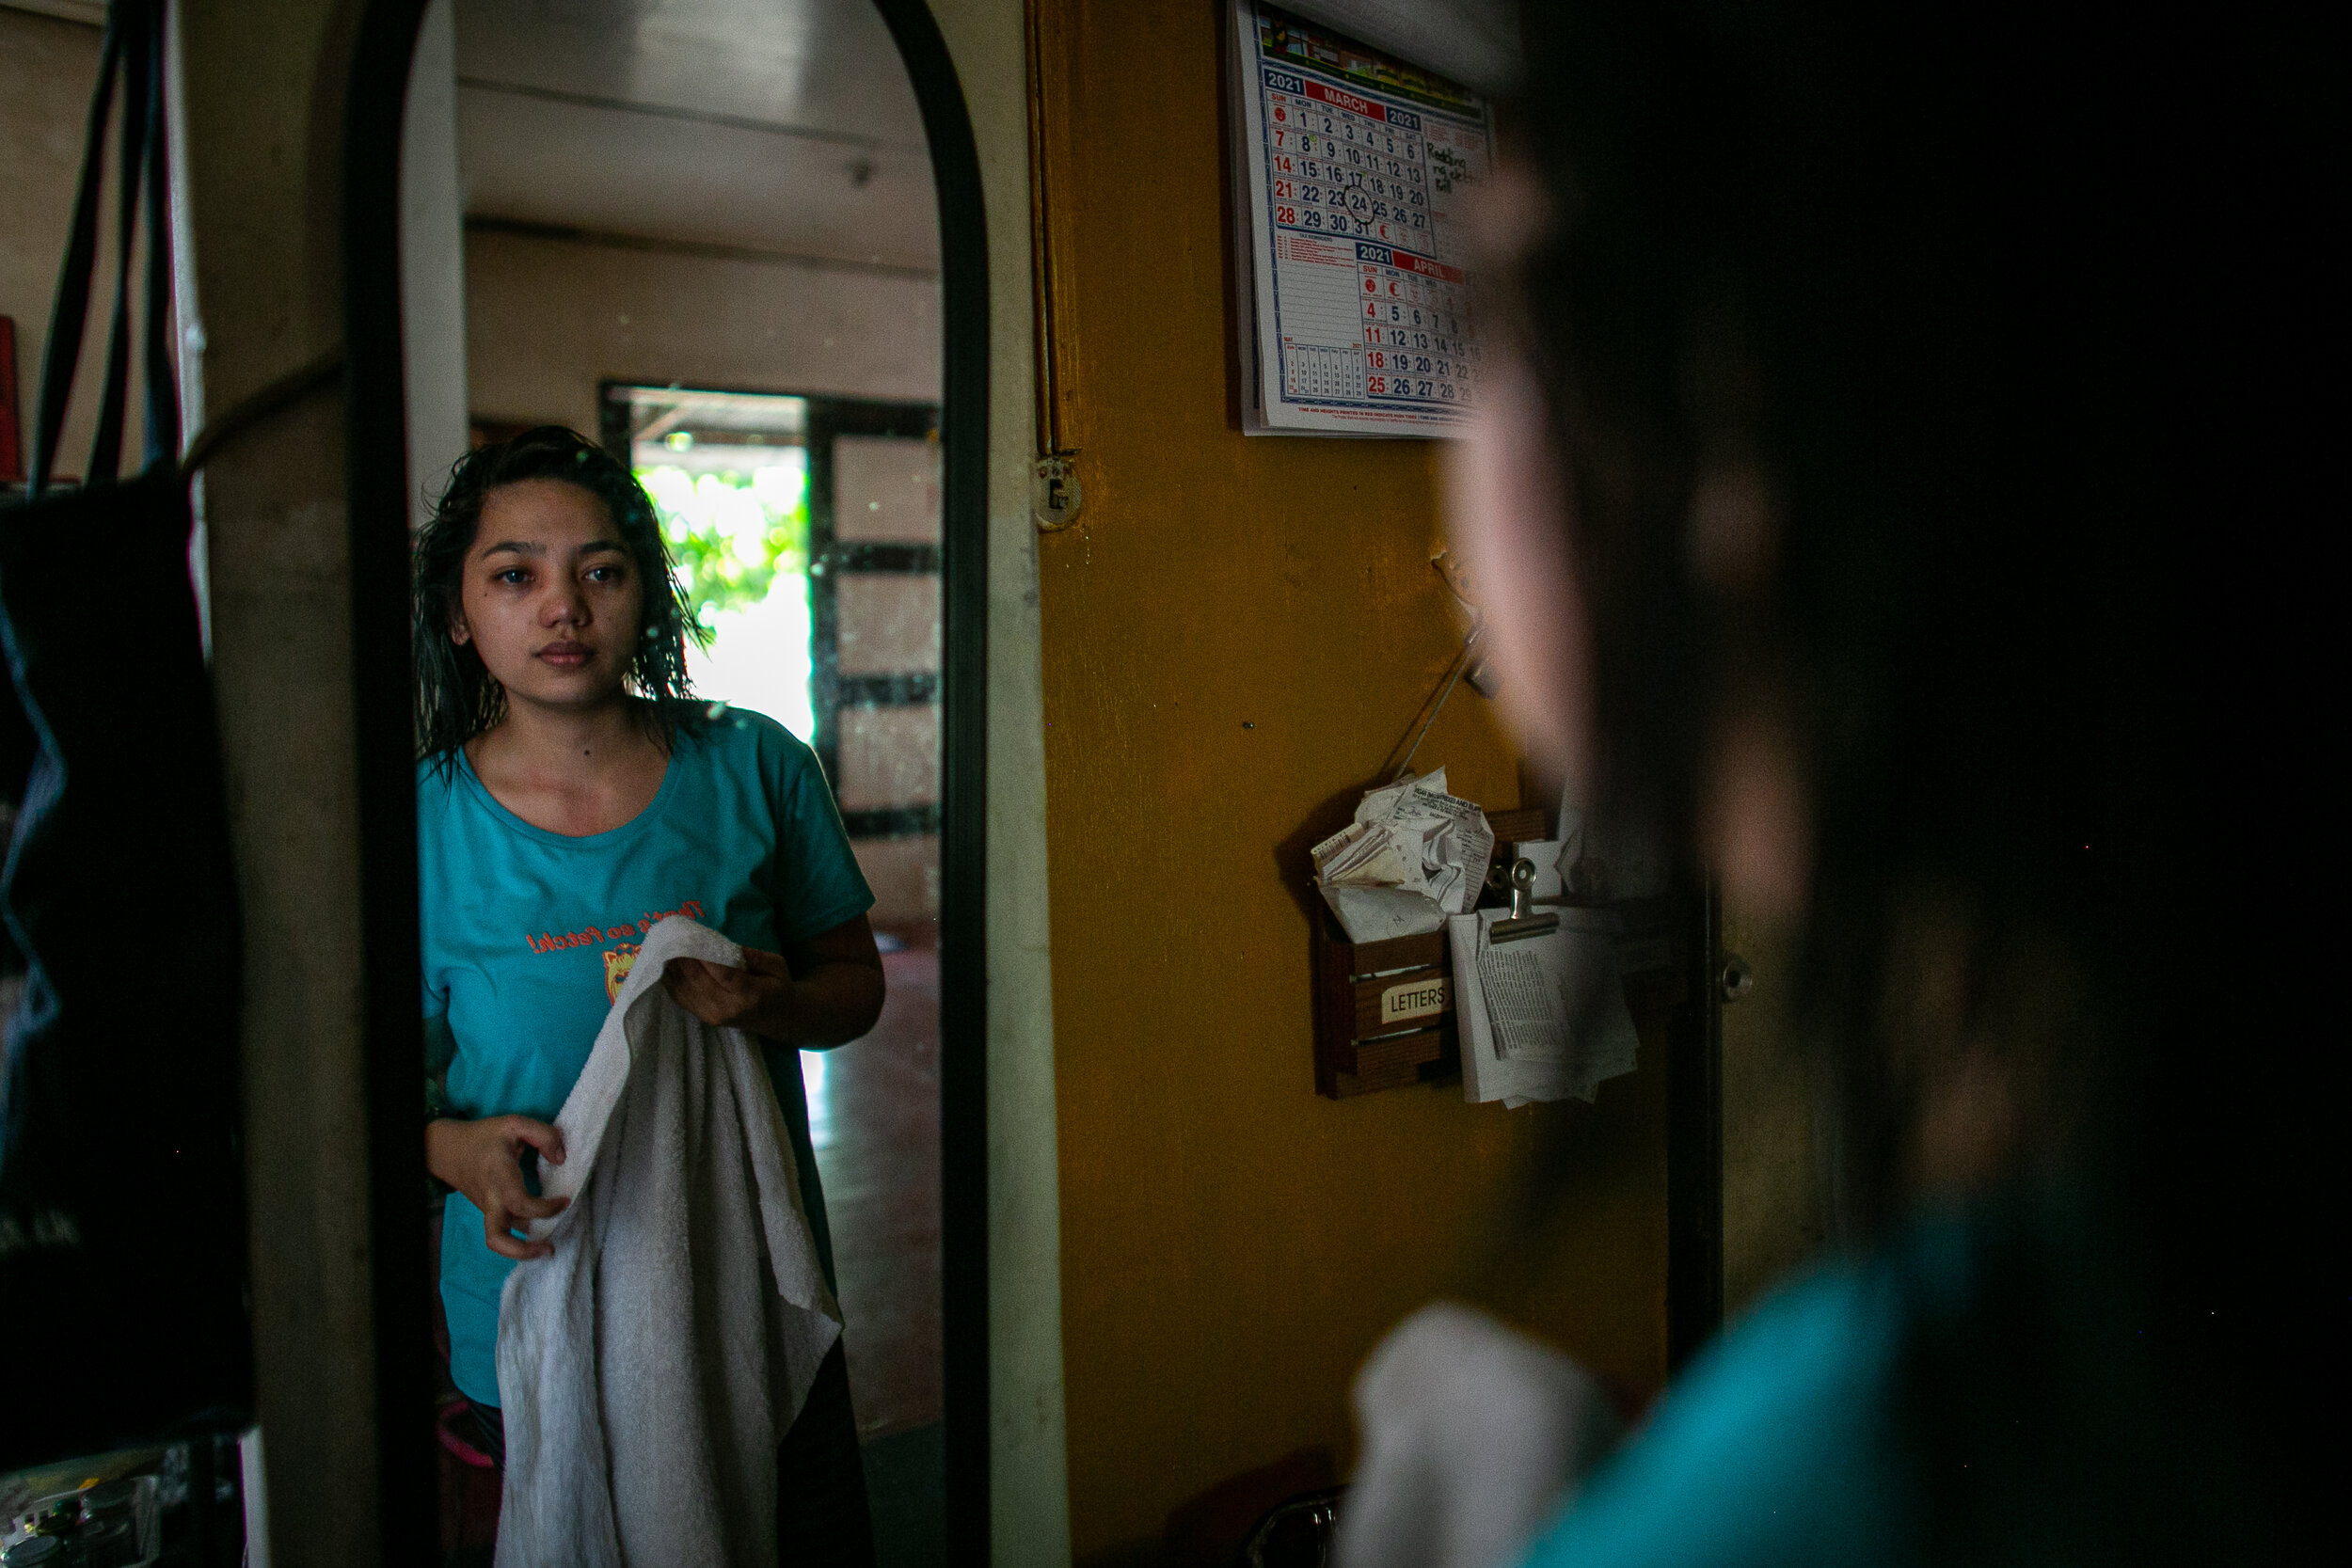  Jenny Beth Mariano, a 25-year-old youth church leader, looks in the mirror to examine if she’d put her contact lenses properly. Last year, Mariano was forced to cut her long hair, use contact lenses instead of eyeglasses, and dress differently to st